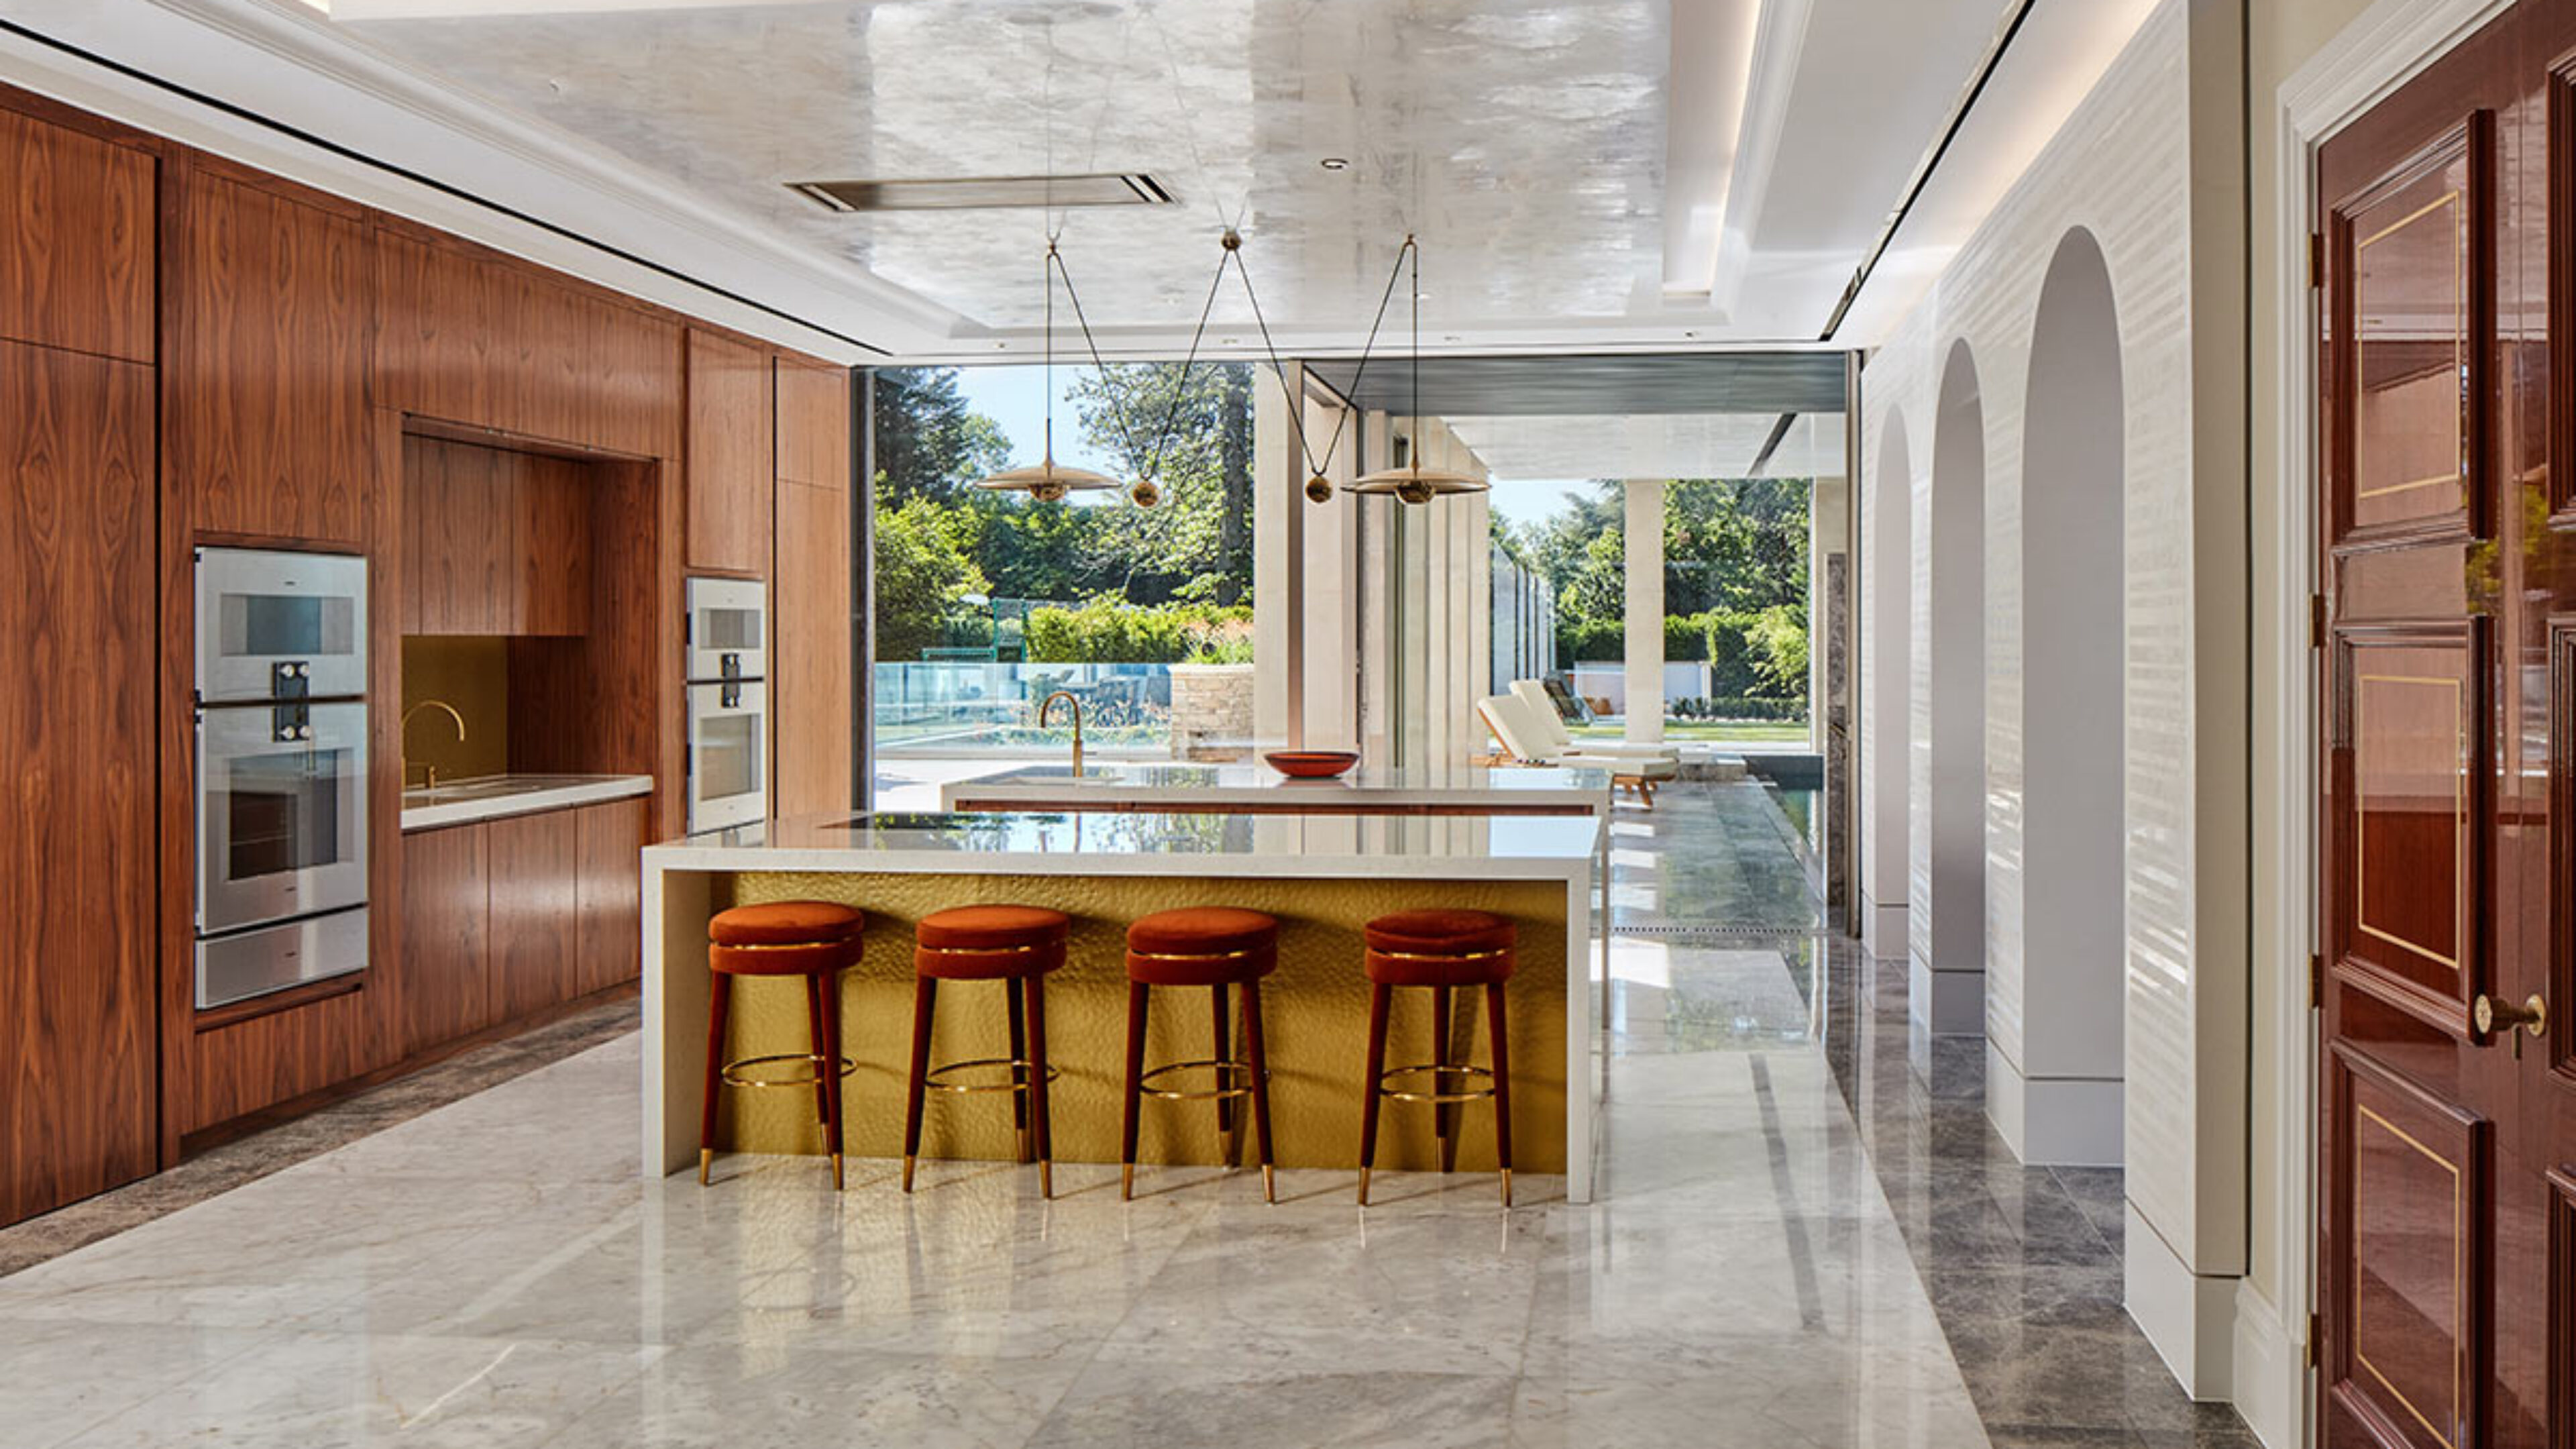 Luxury kitchen with Armourcoat Spatulata polished plaster finish used on ceiling